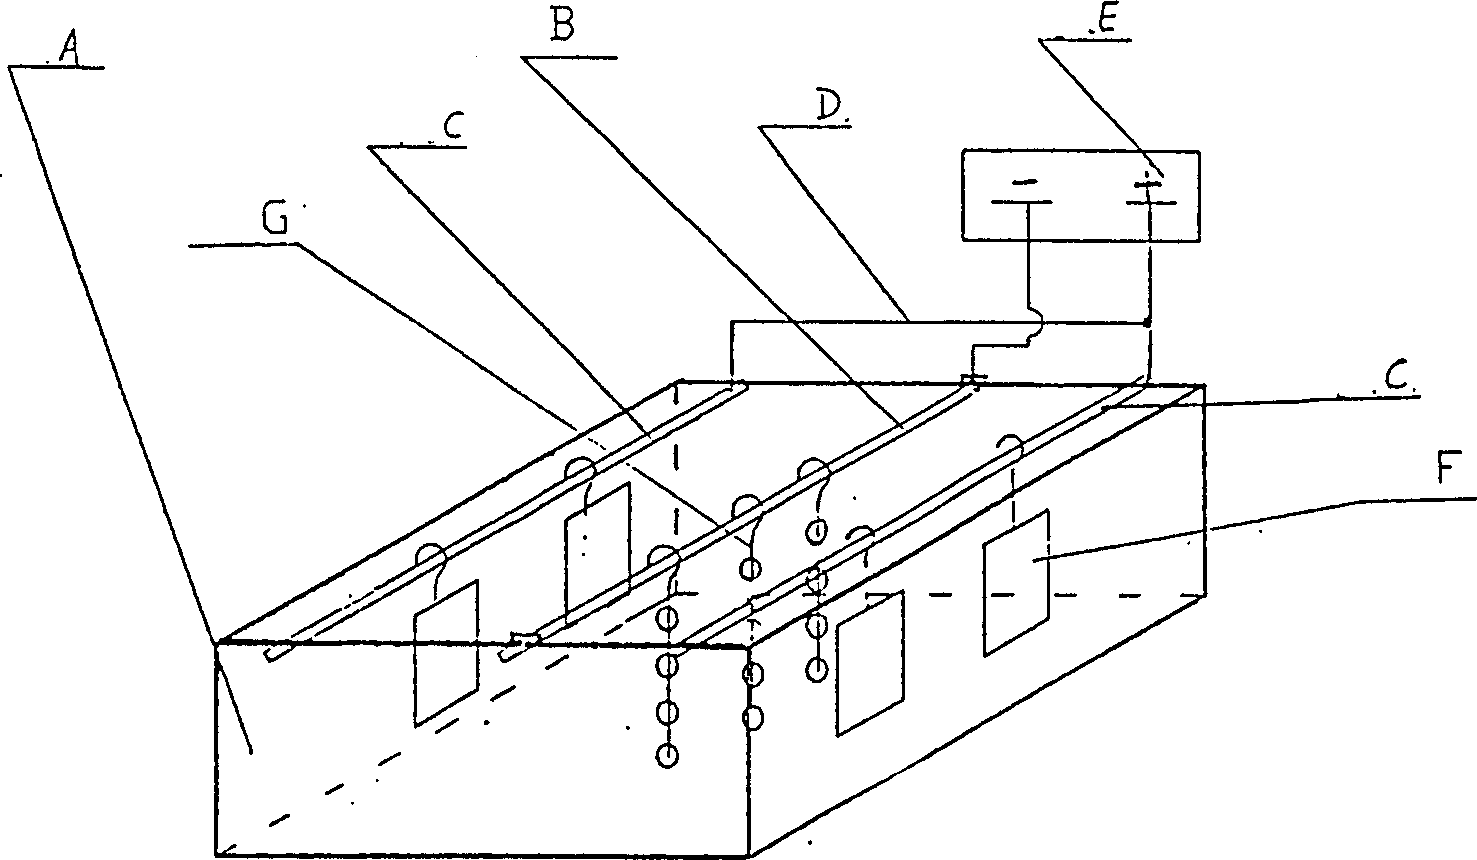 Technique method for electroplating inner surfaces of gear wheel holes and dedicated equipments